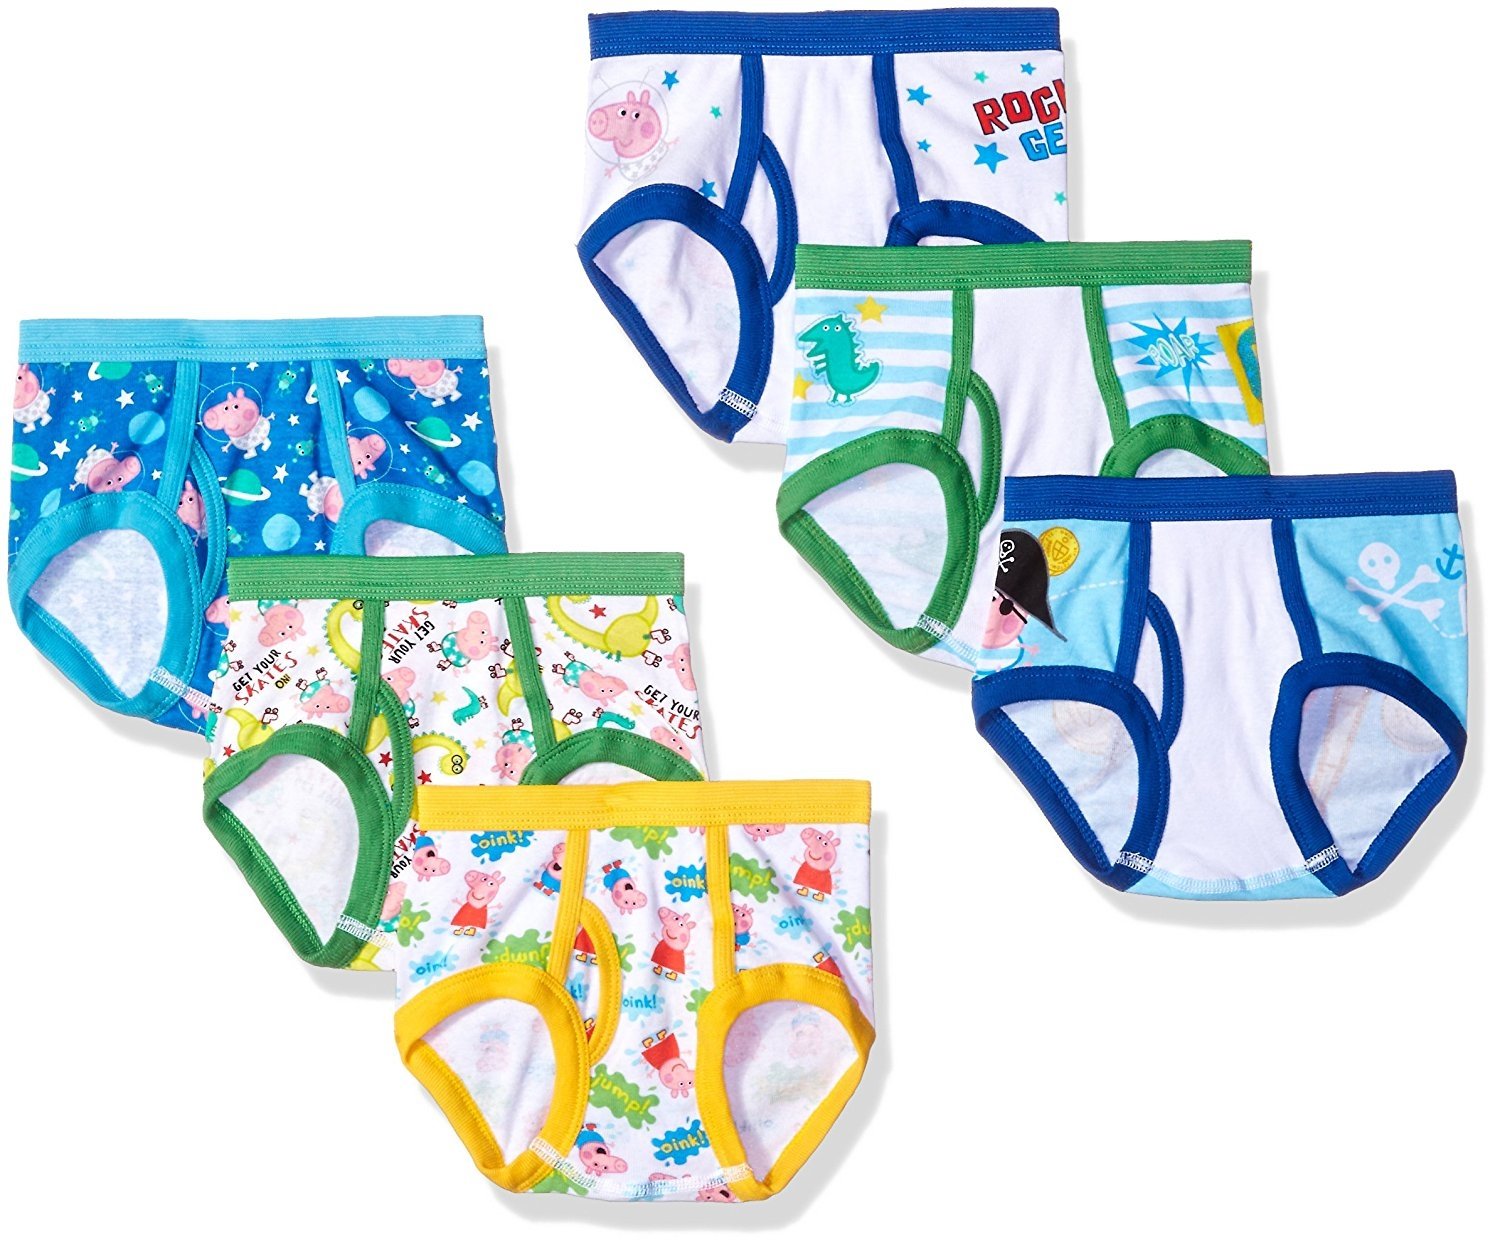 Handcraft Cars Underwear for Toddler Boys 7-Pack (2T-4T) 4T